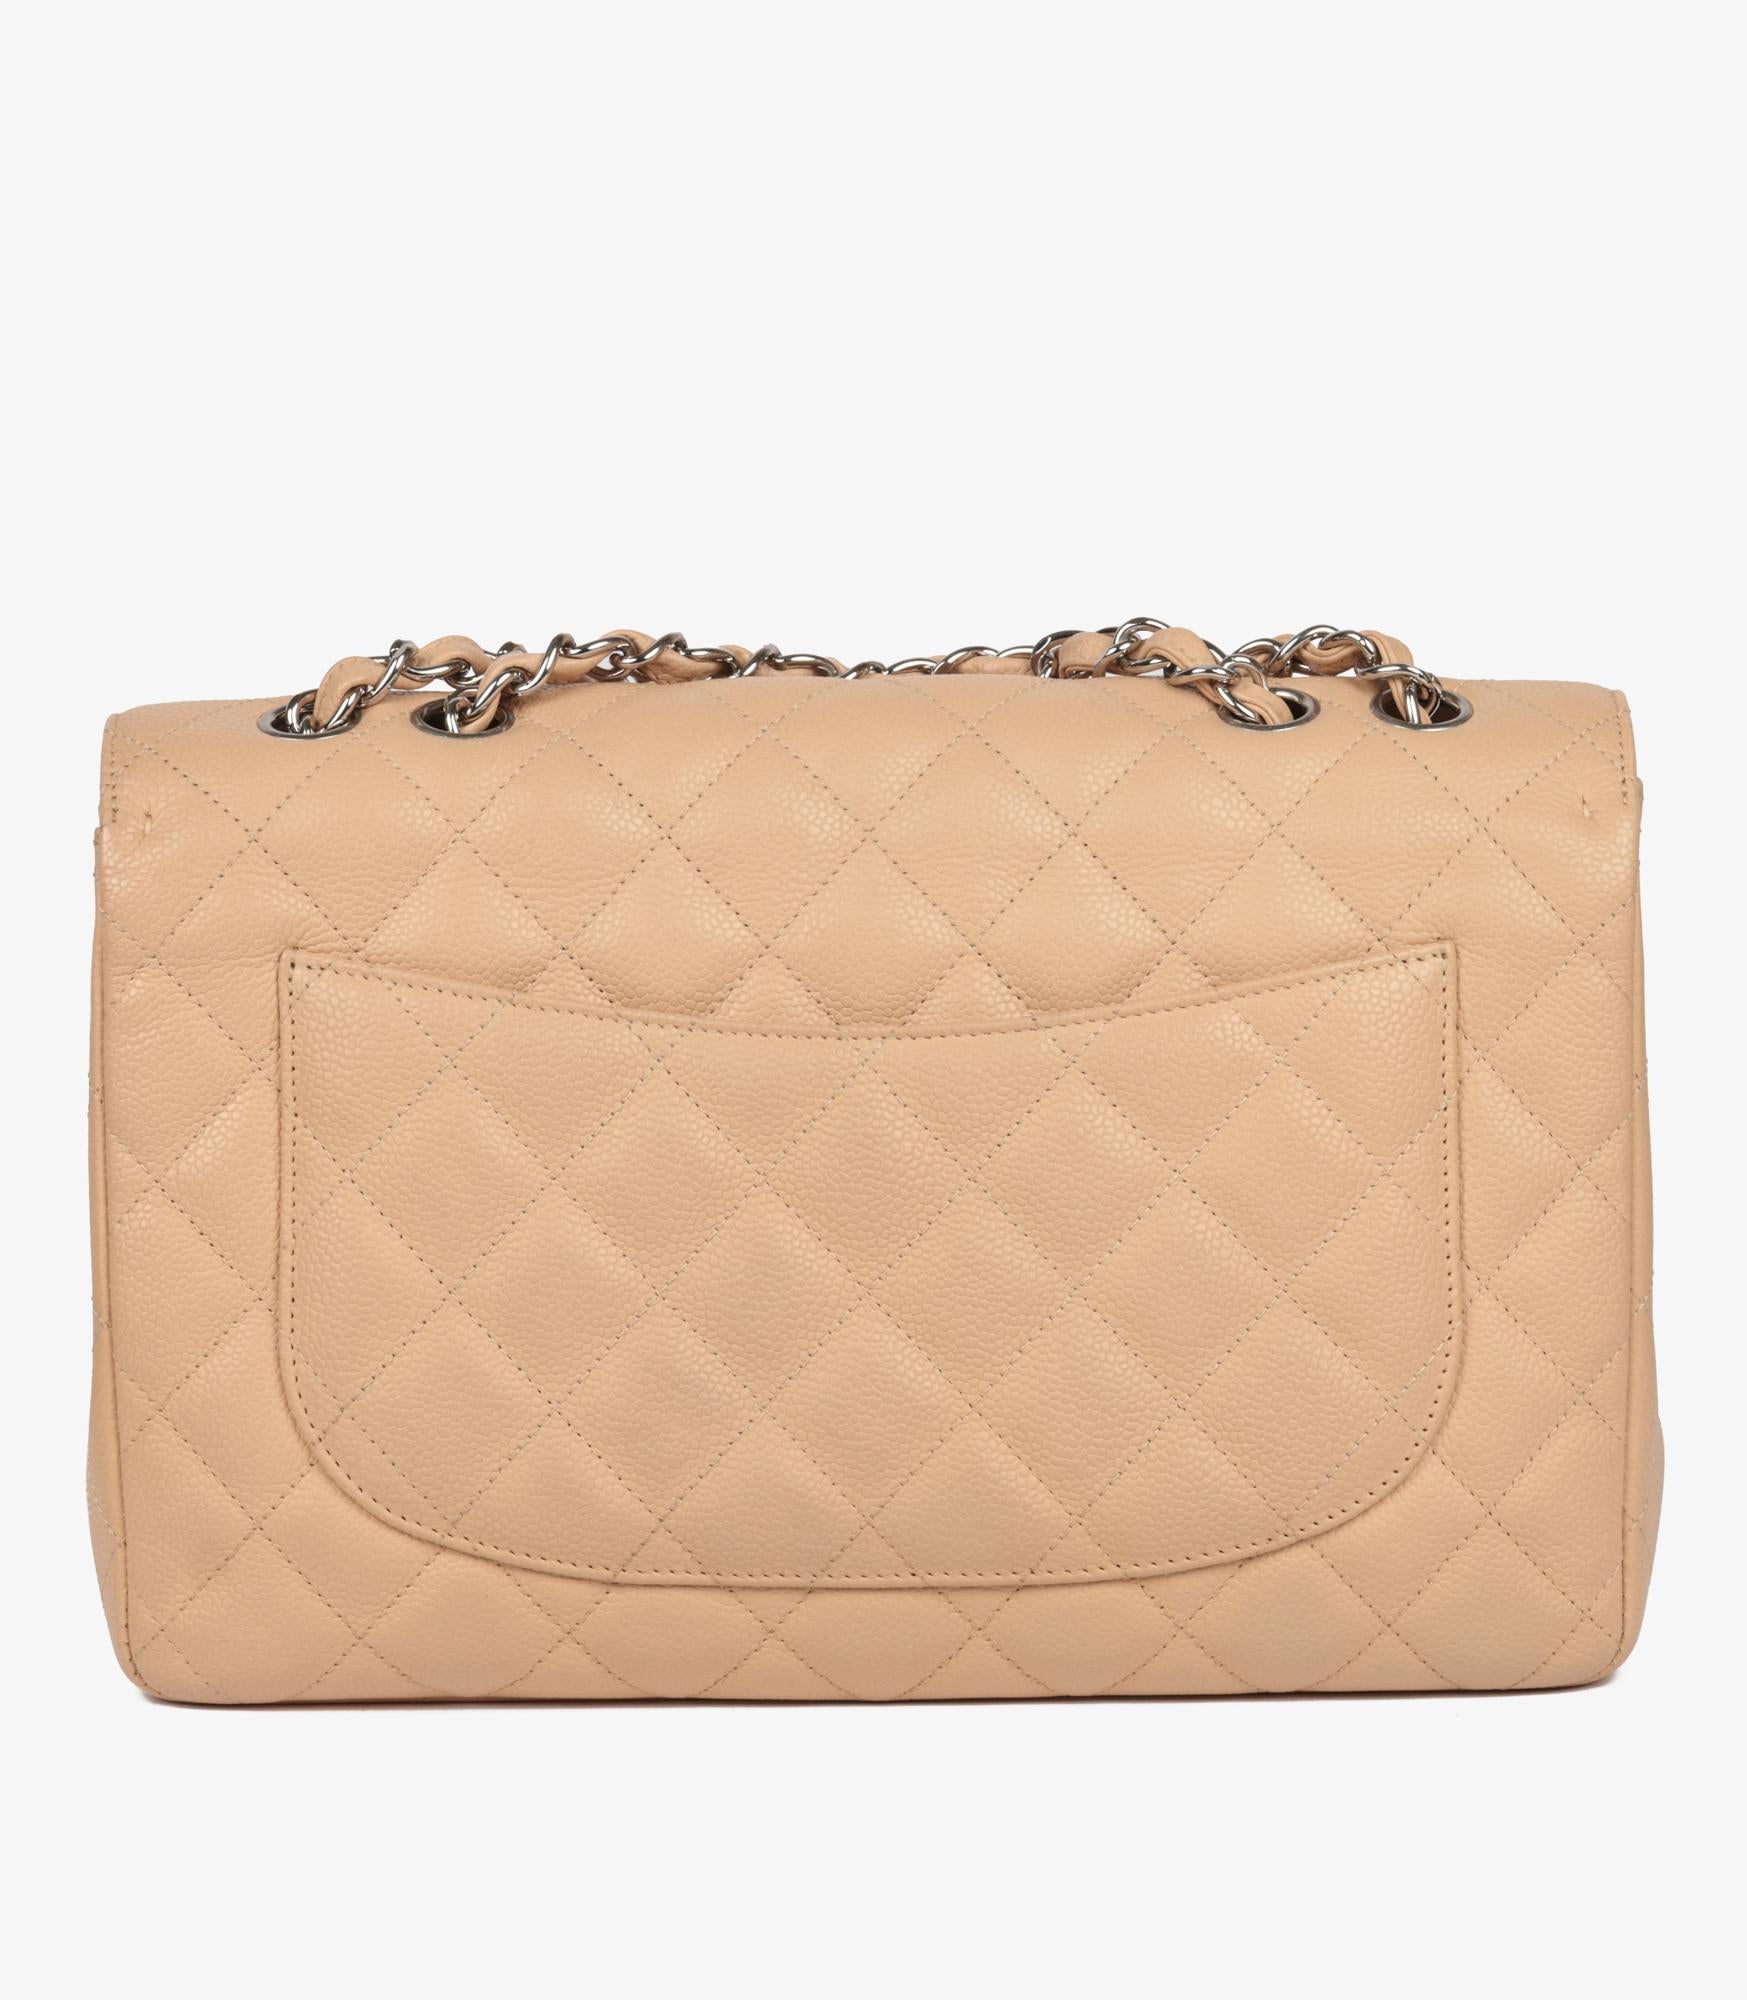 Chanel Beige Quilted Caviar Leather Jumbo Classic Single Flap Bag 2